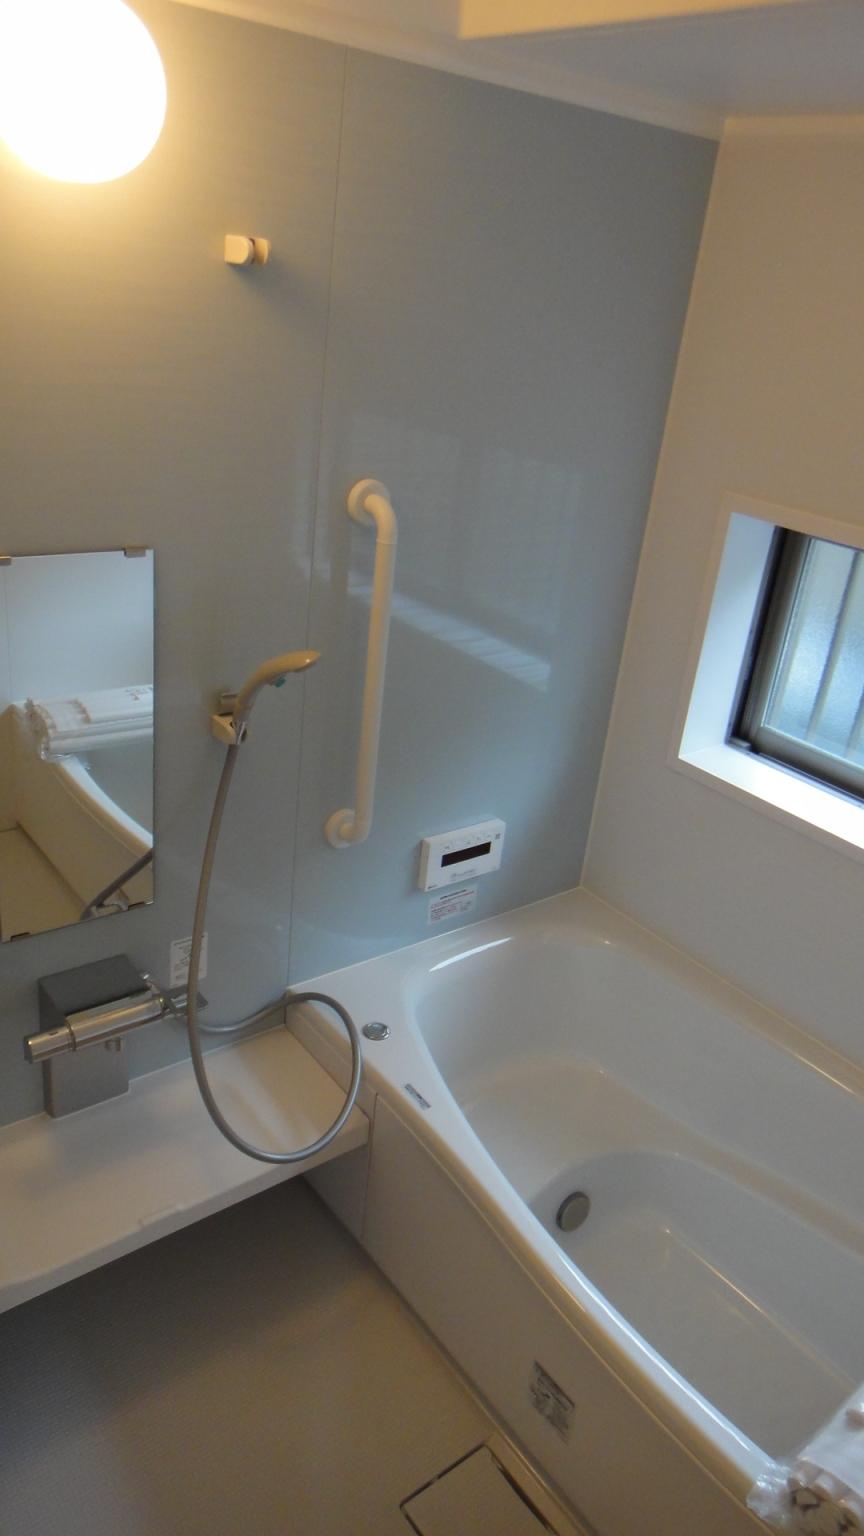 Same specifications photo (bathroom). It is different from the real thing.